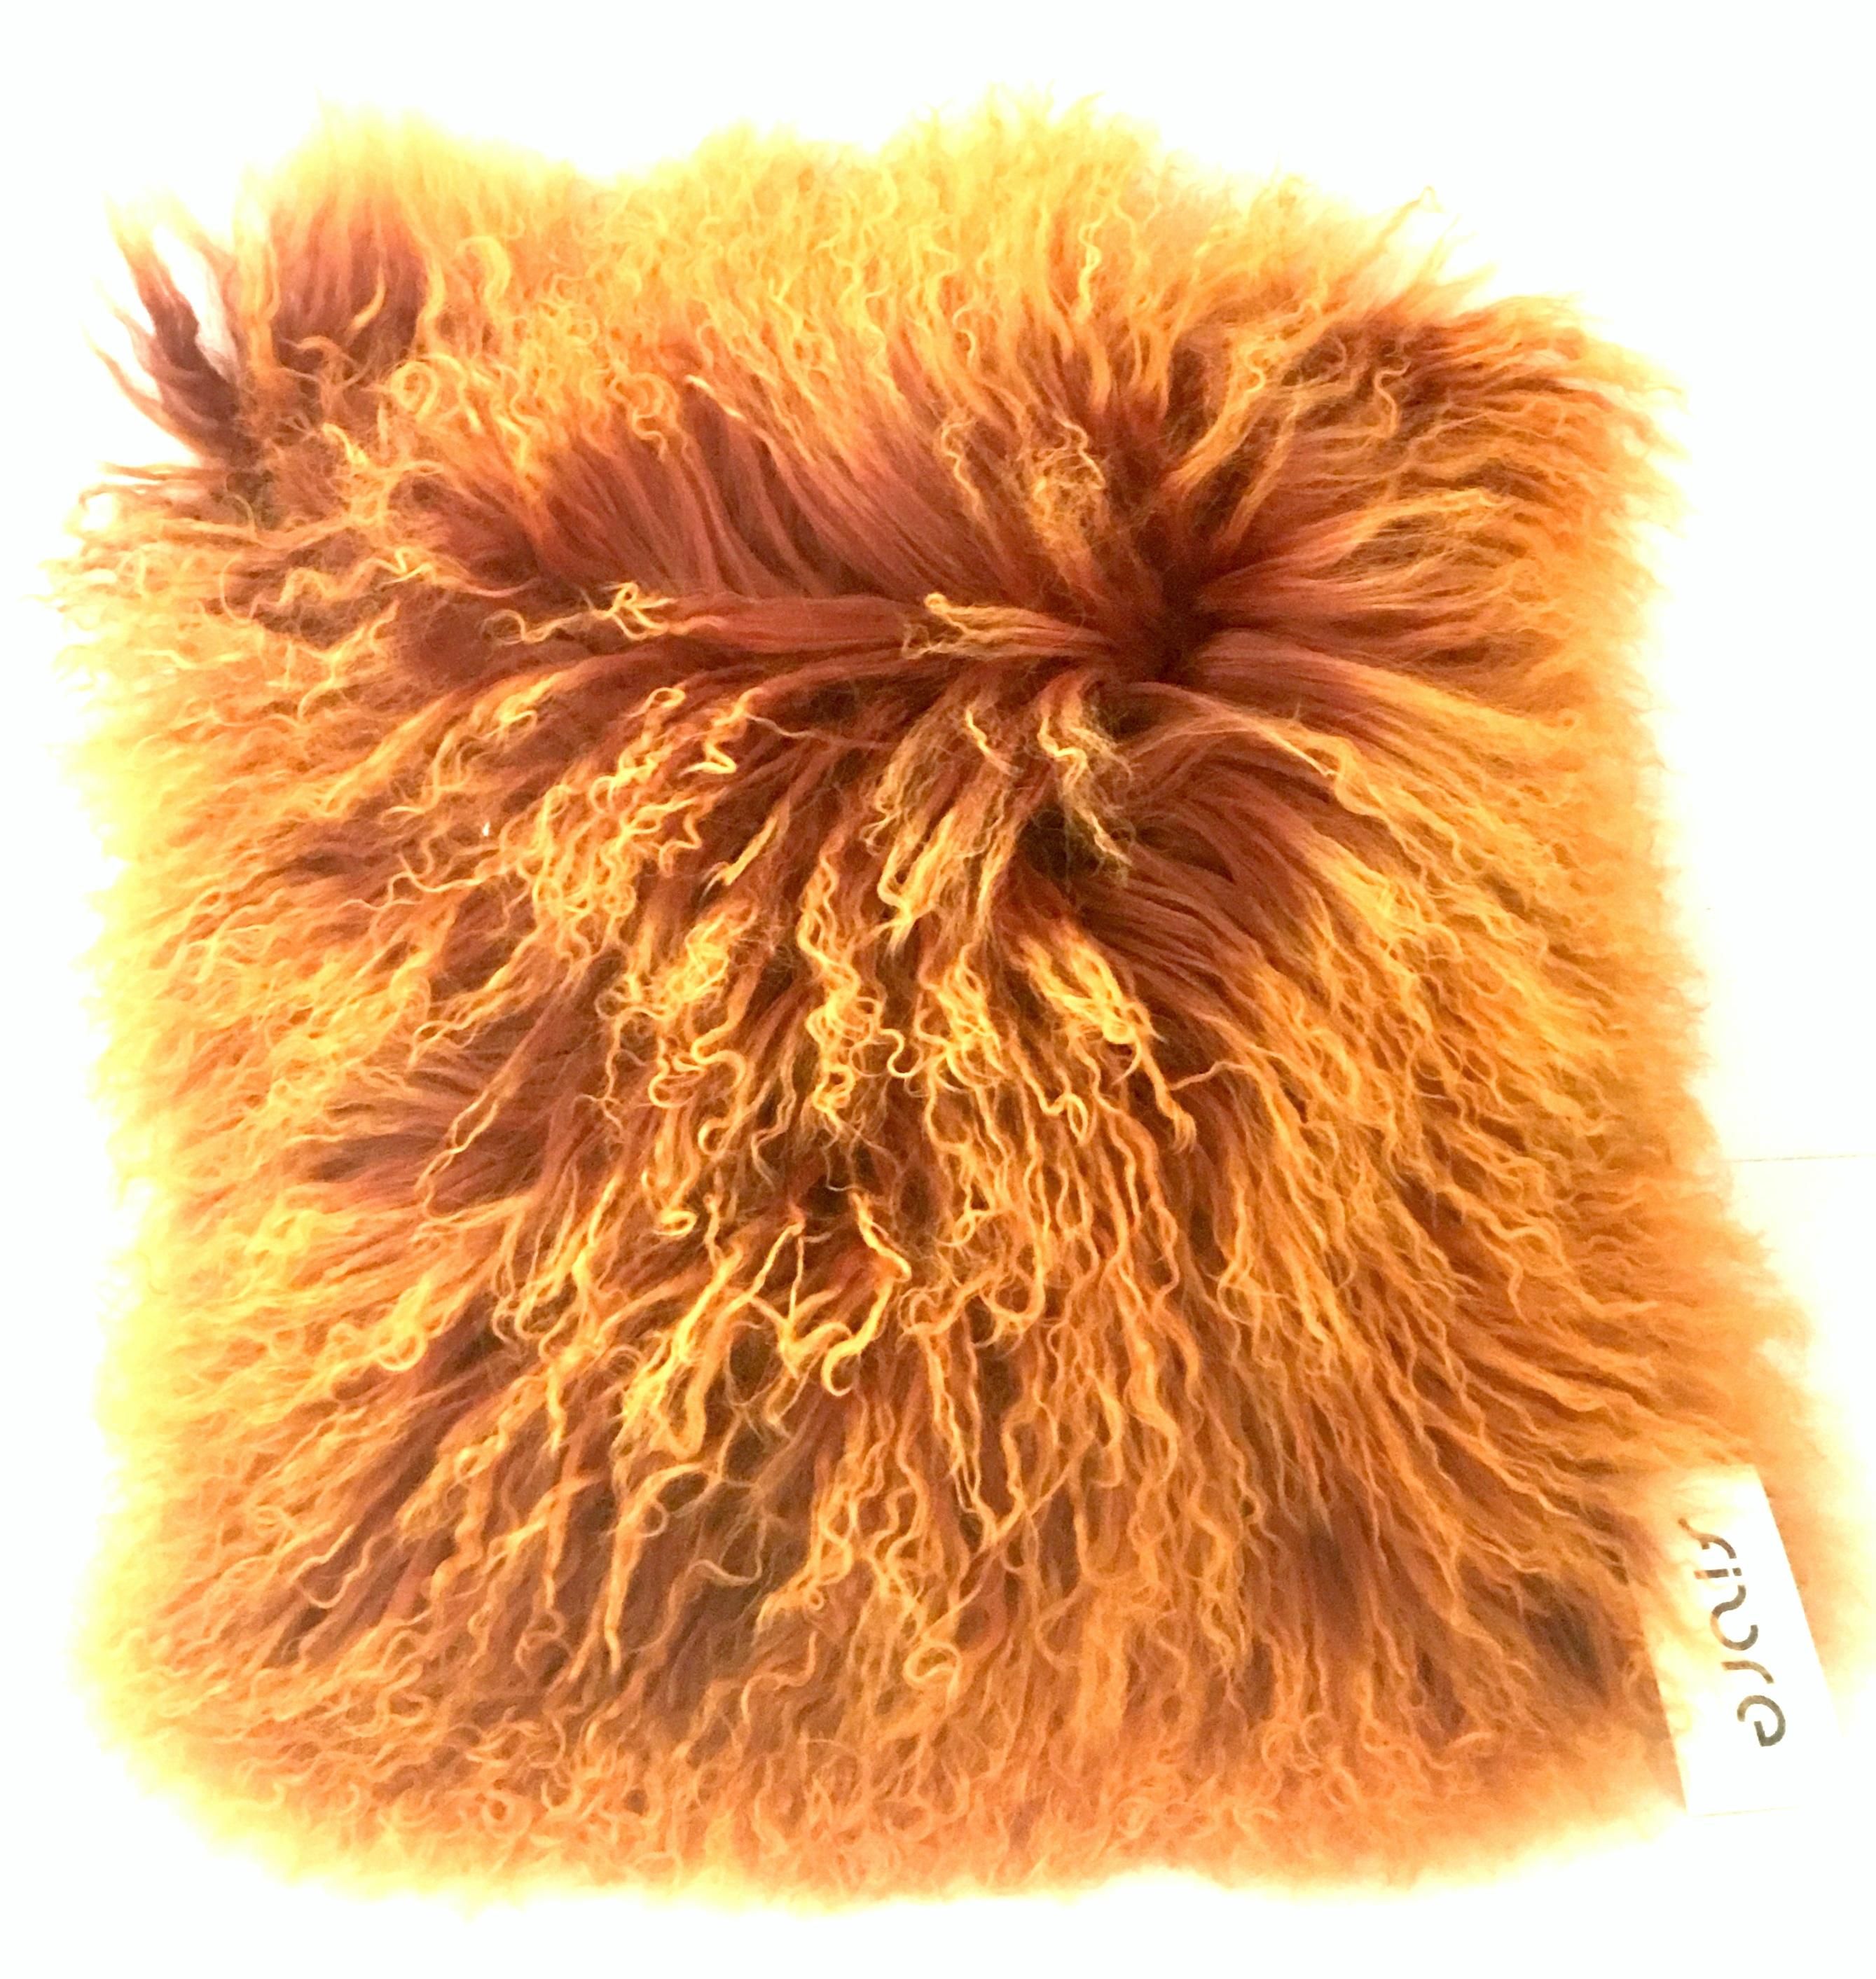 21st century and new Australian sheepskin orange long curly hair fur pillow by, Auskin. Includes a new cotton blend insert. The chocolate brown ultra-suede back panel has a hidden zipper for easy removal. The original manufacturer tag is present.